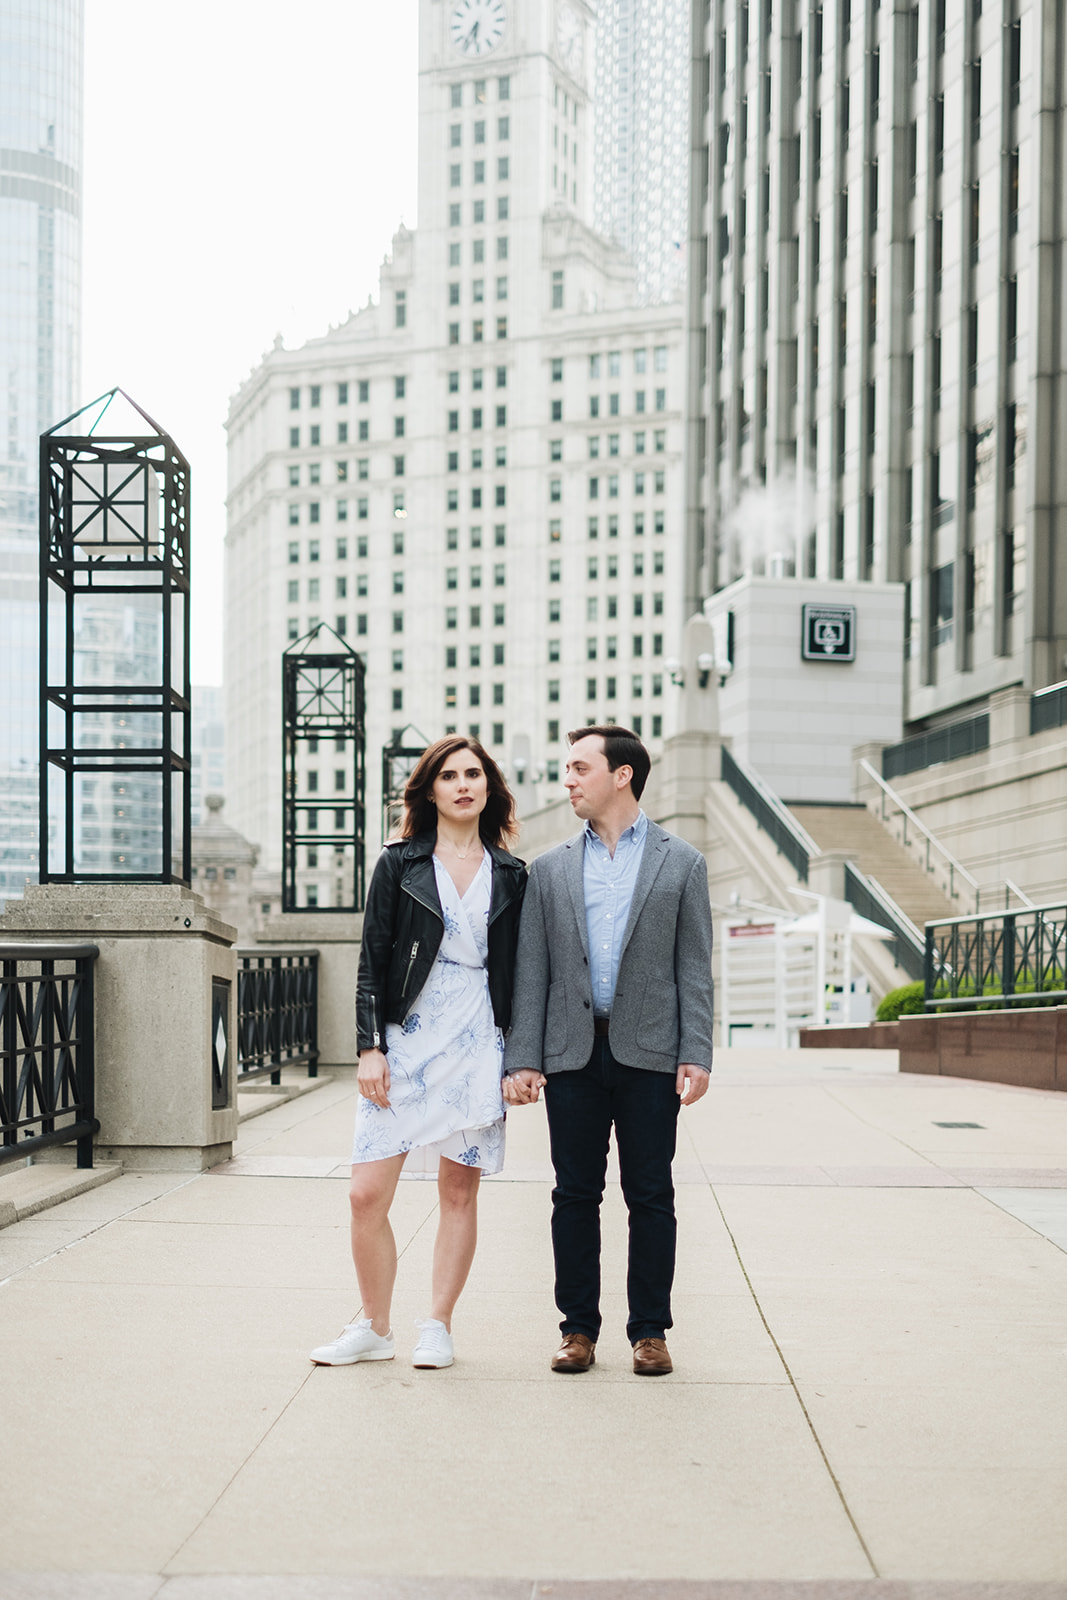 Couple standing in front of buildings for Chicago engagement session locations including The Chicago Riverwalk. Wedding photos by Michael & Kristin Photo and Video